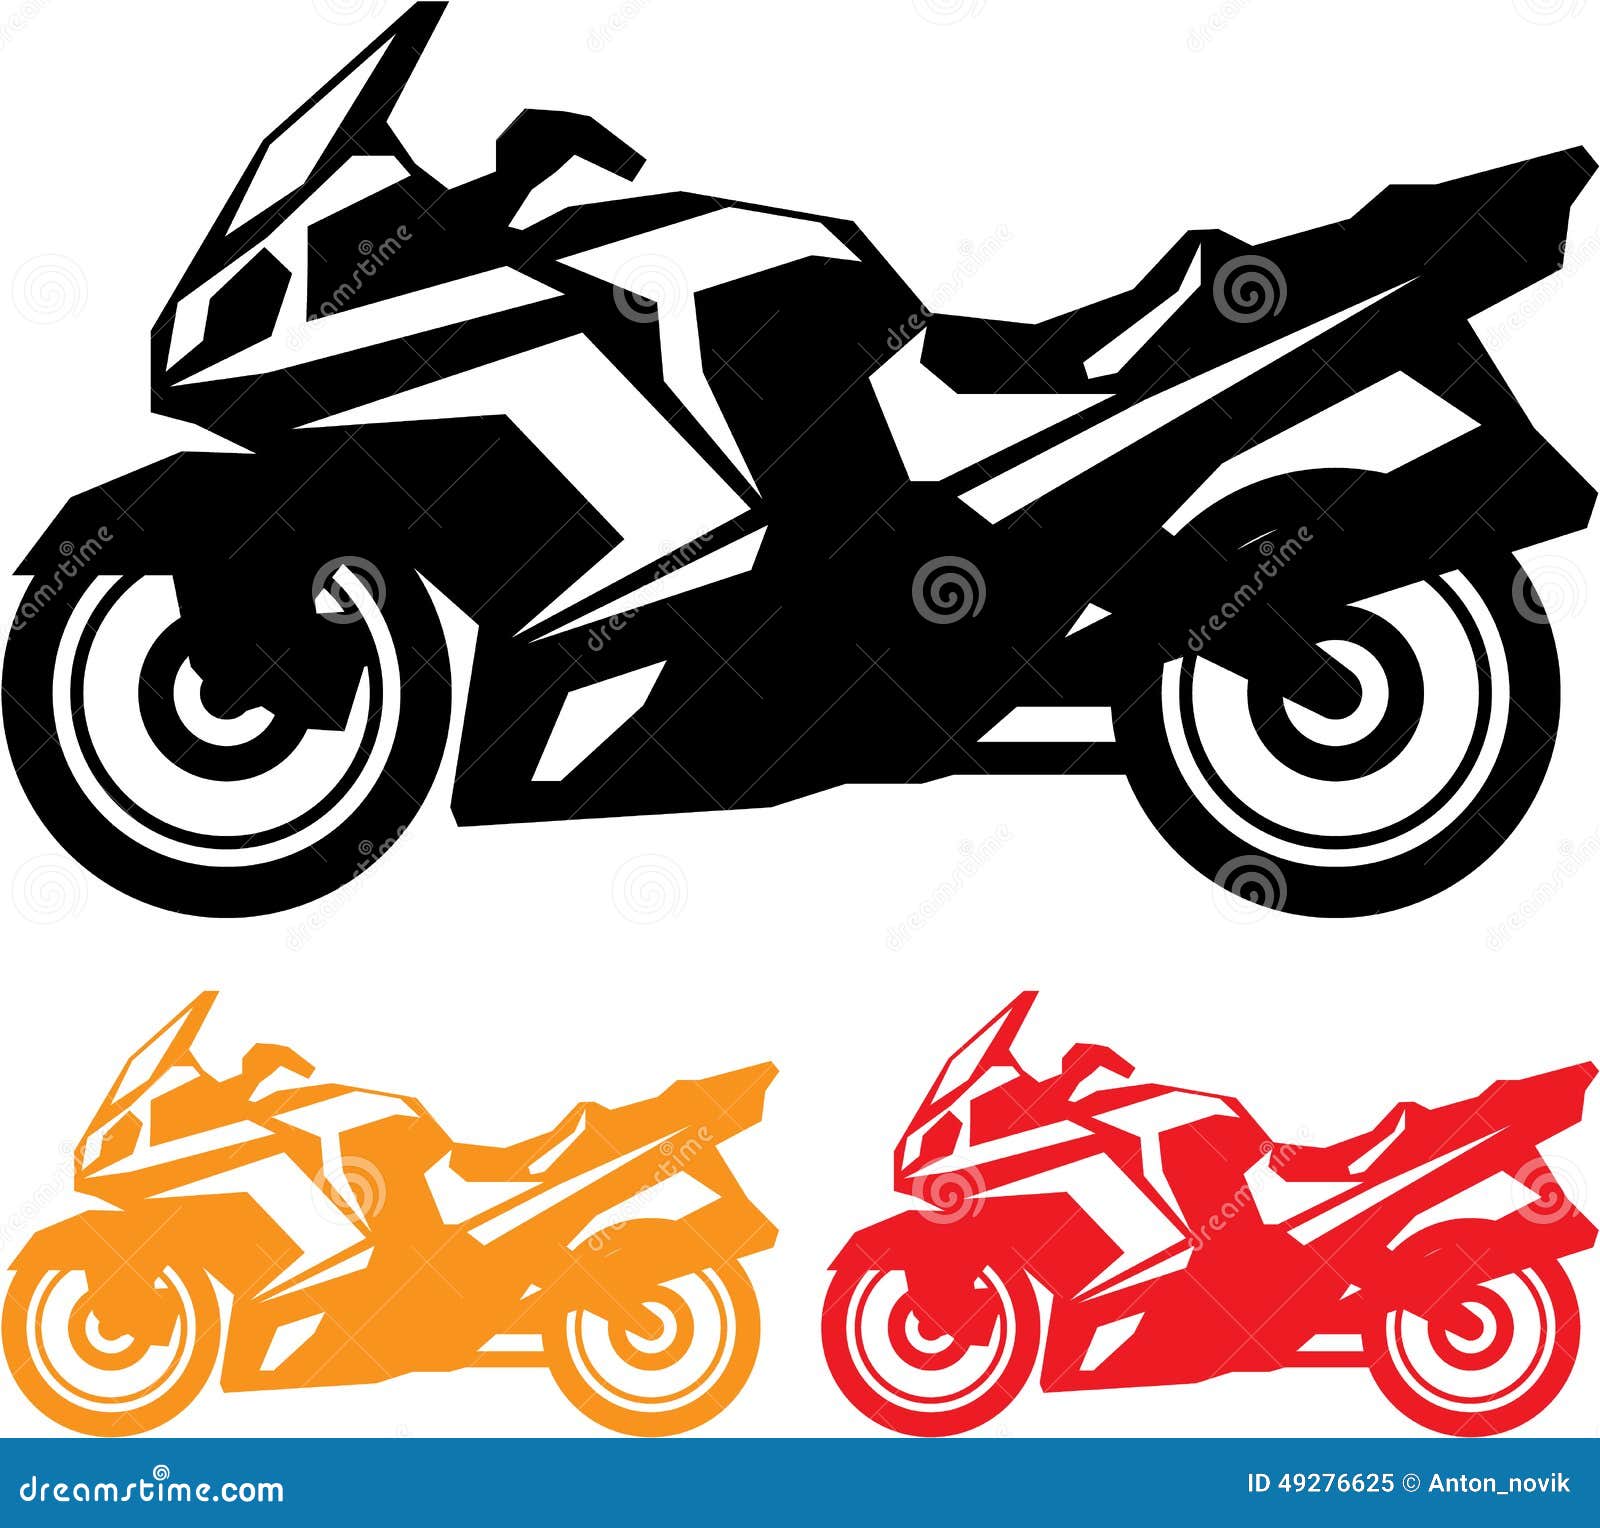 motorcycle clipart vector - photo #31